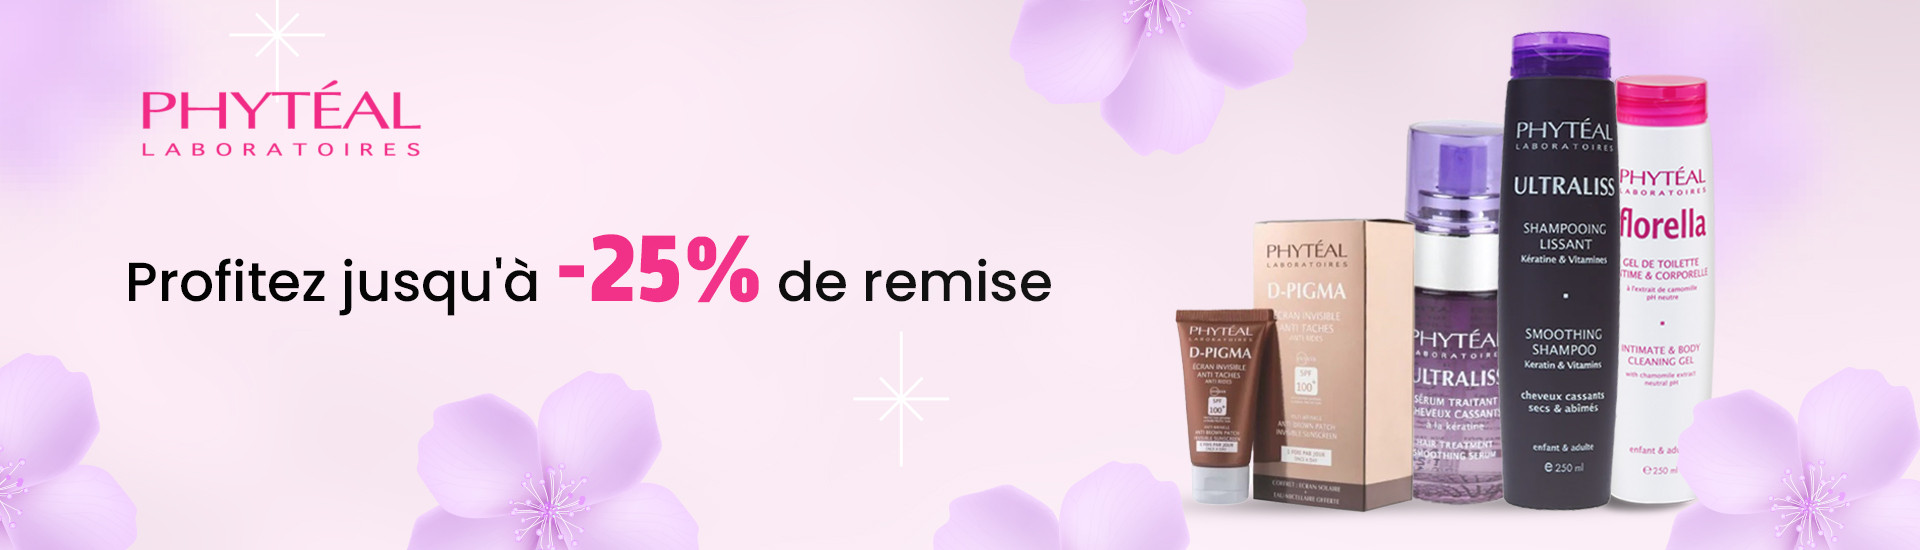 Offre PHYTEAL - remise 25%